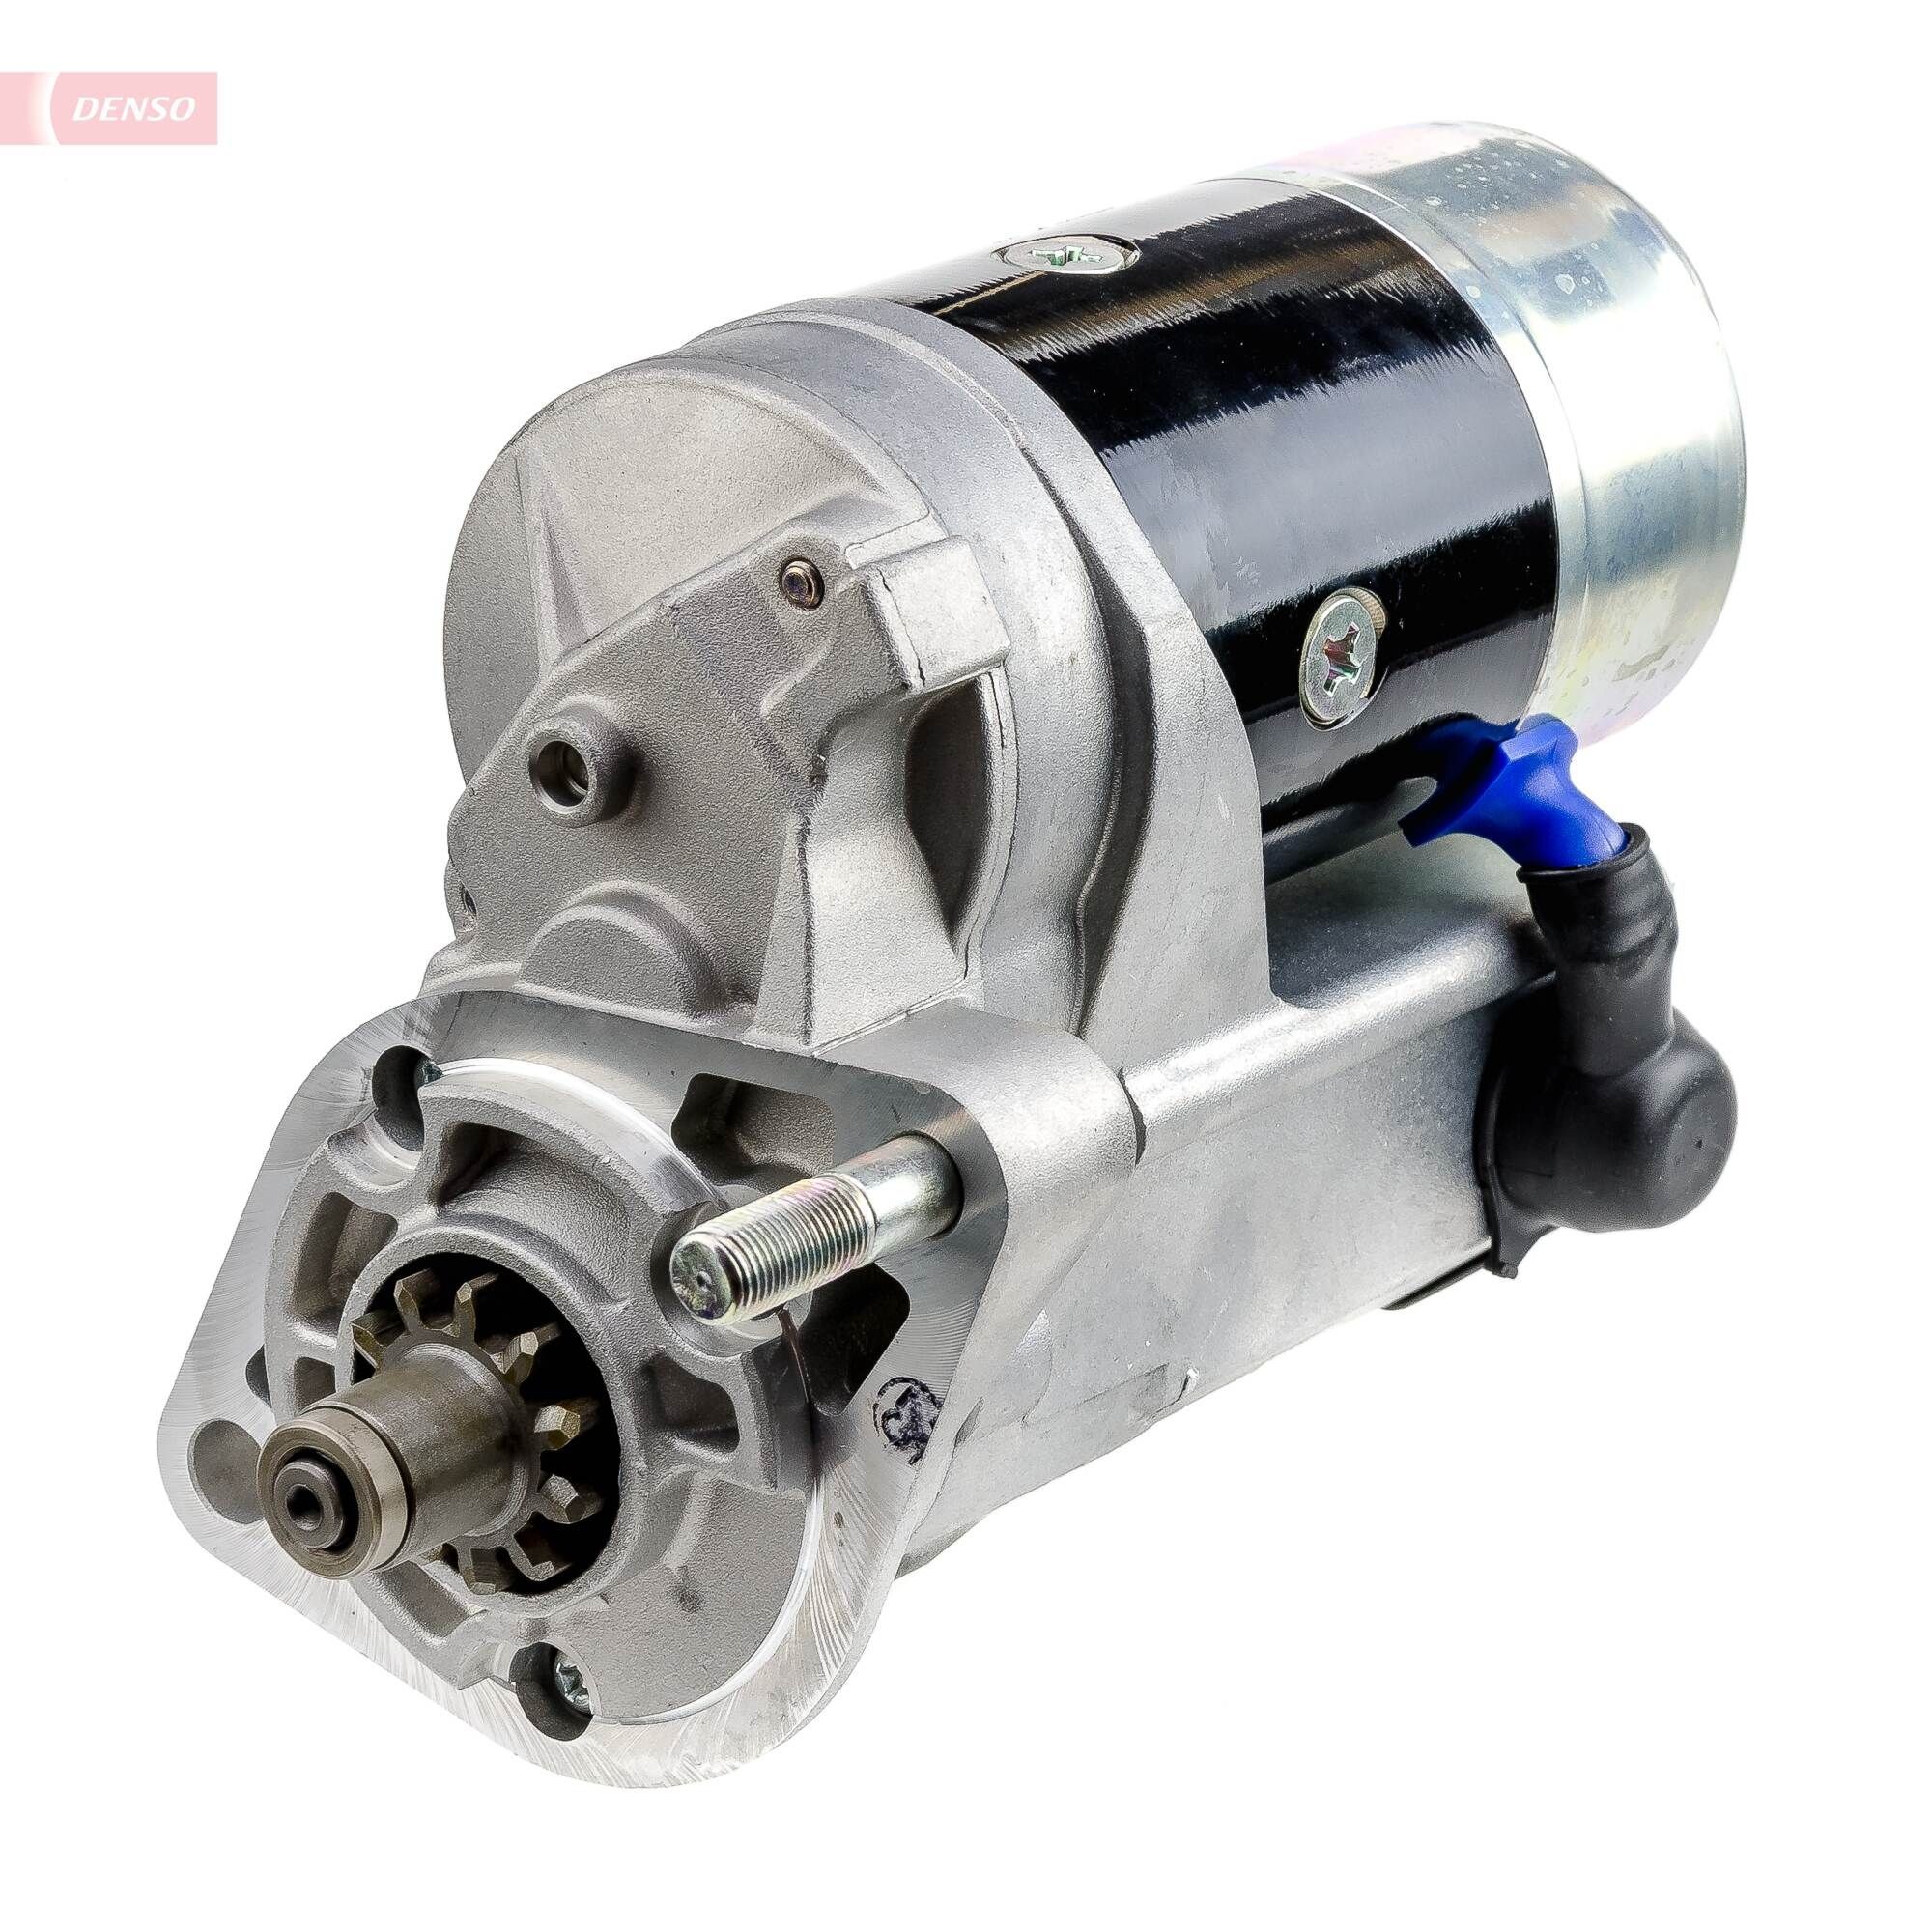 DENSO DSN1229 Starter motor JEEP experience and price